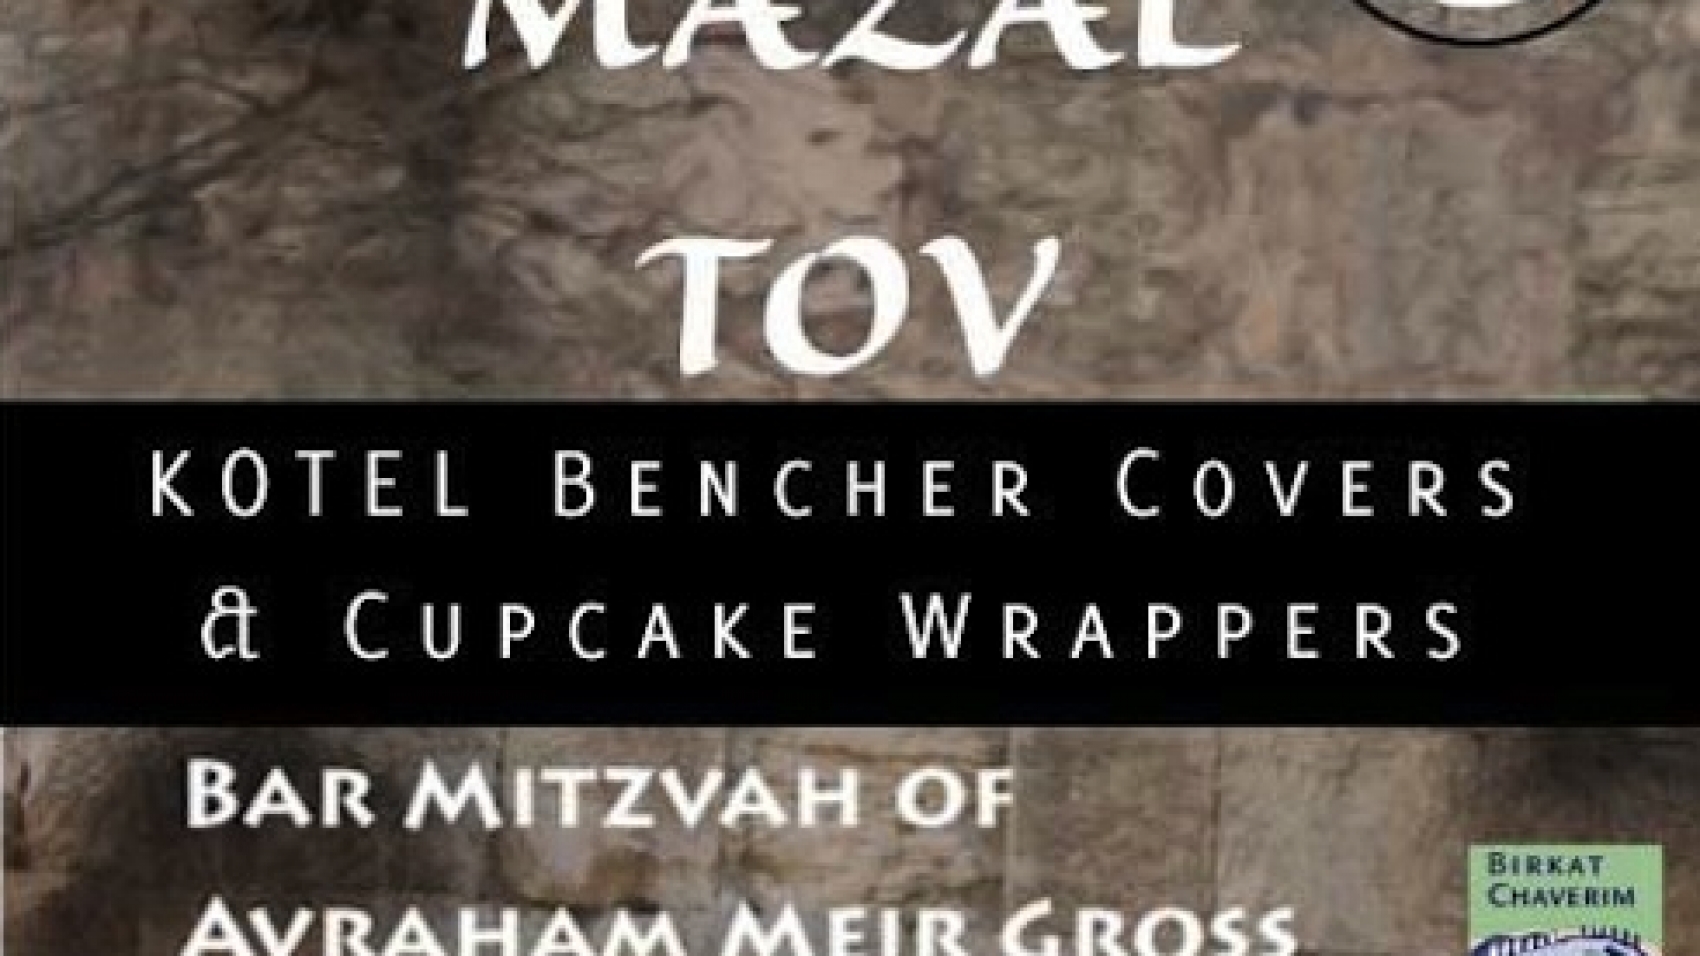 Bencher covers and cupcake wrappers with kotel design